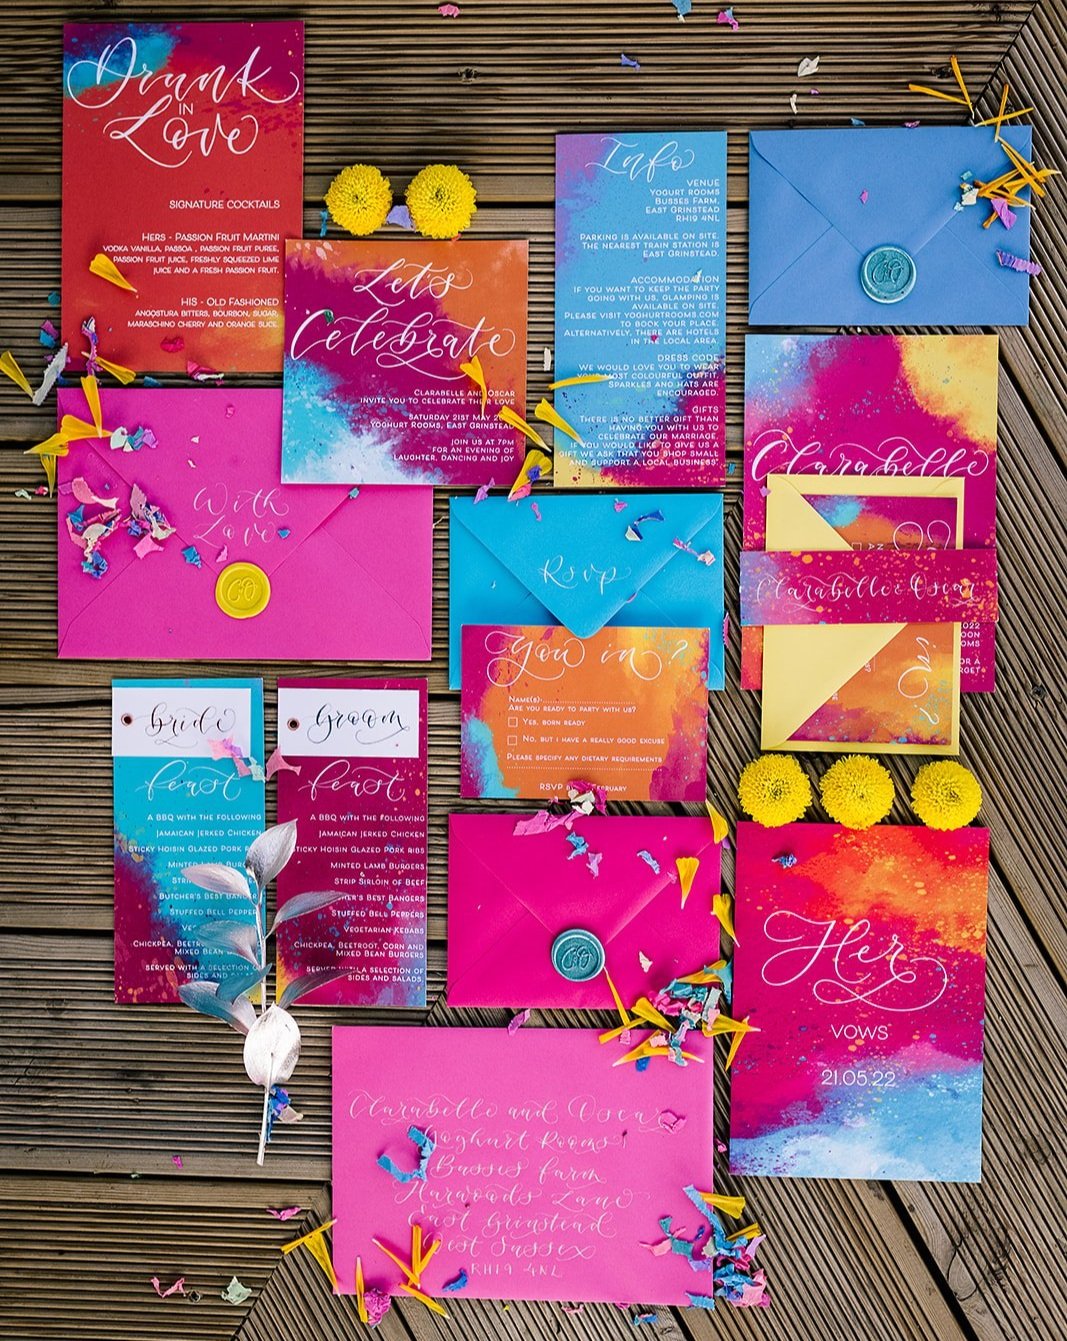 Festival+wedding+stationery+watercolour+wedding+stationery+with+hot+pink+orange+and+blue%2Ccalligraphy%2C+custom+wax+seals+and+calligraphy+envelopes.jpg